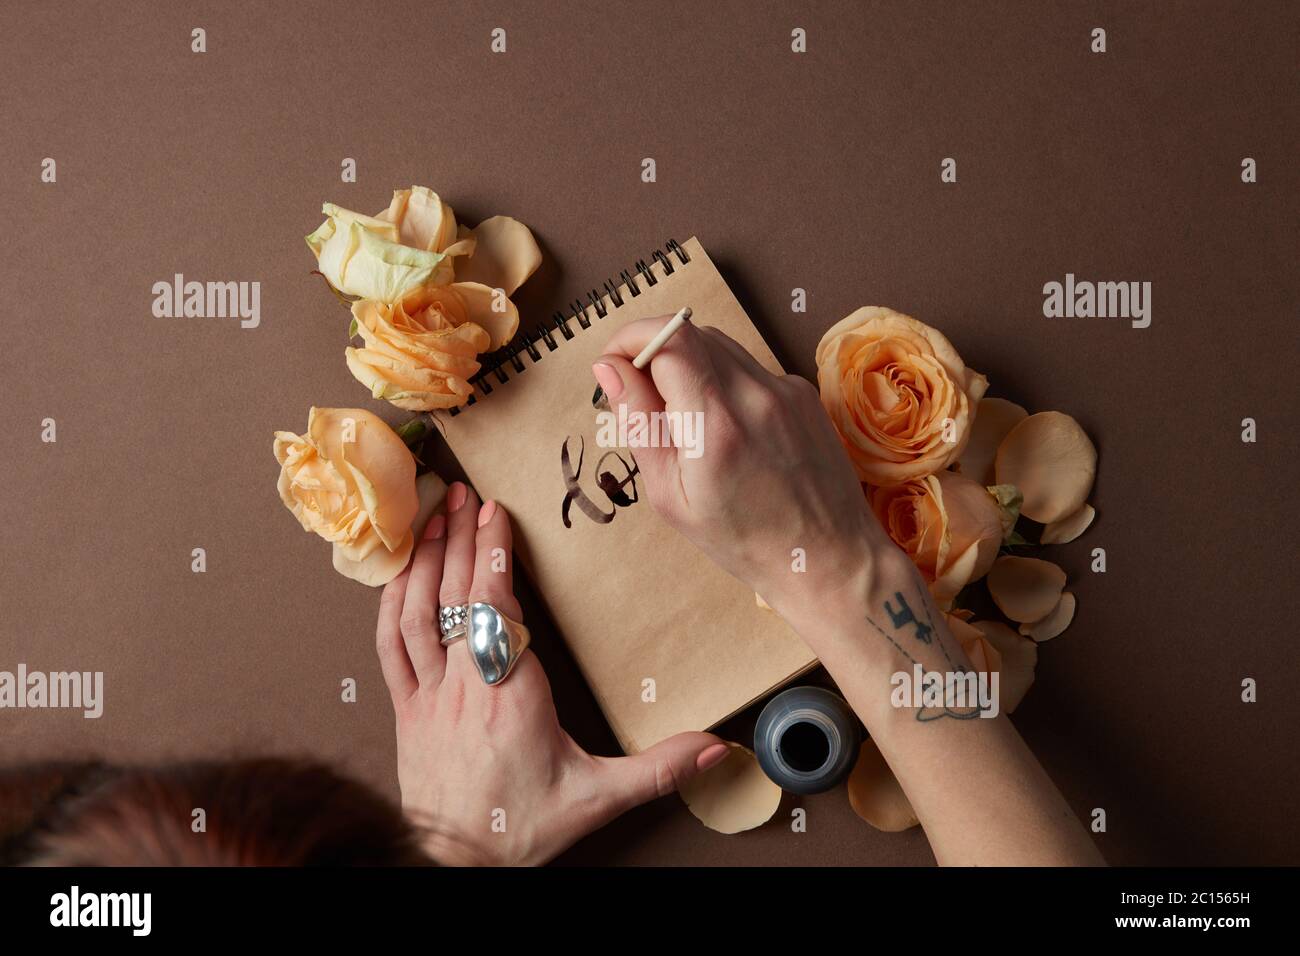 Hand writing a love letter Stock Photo